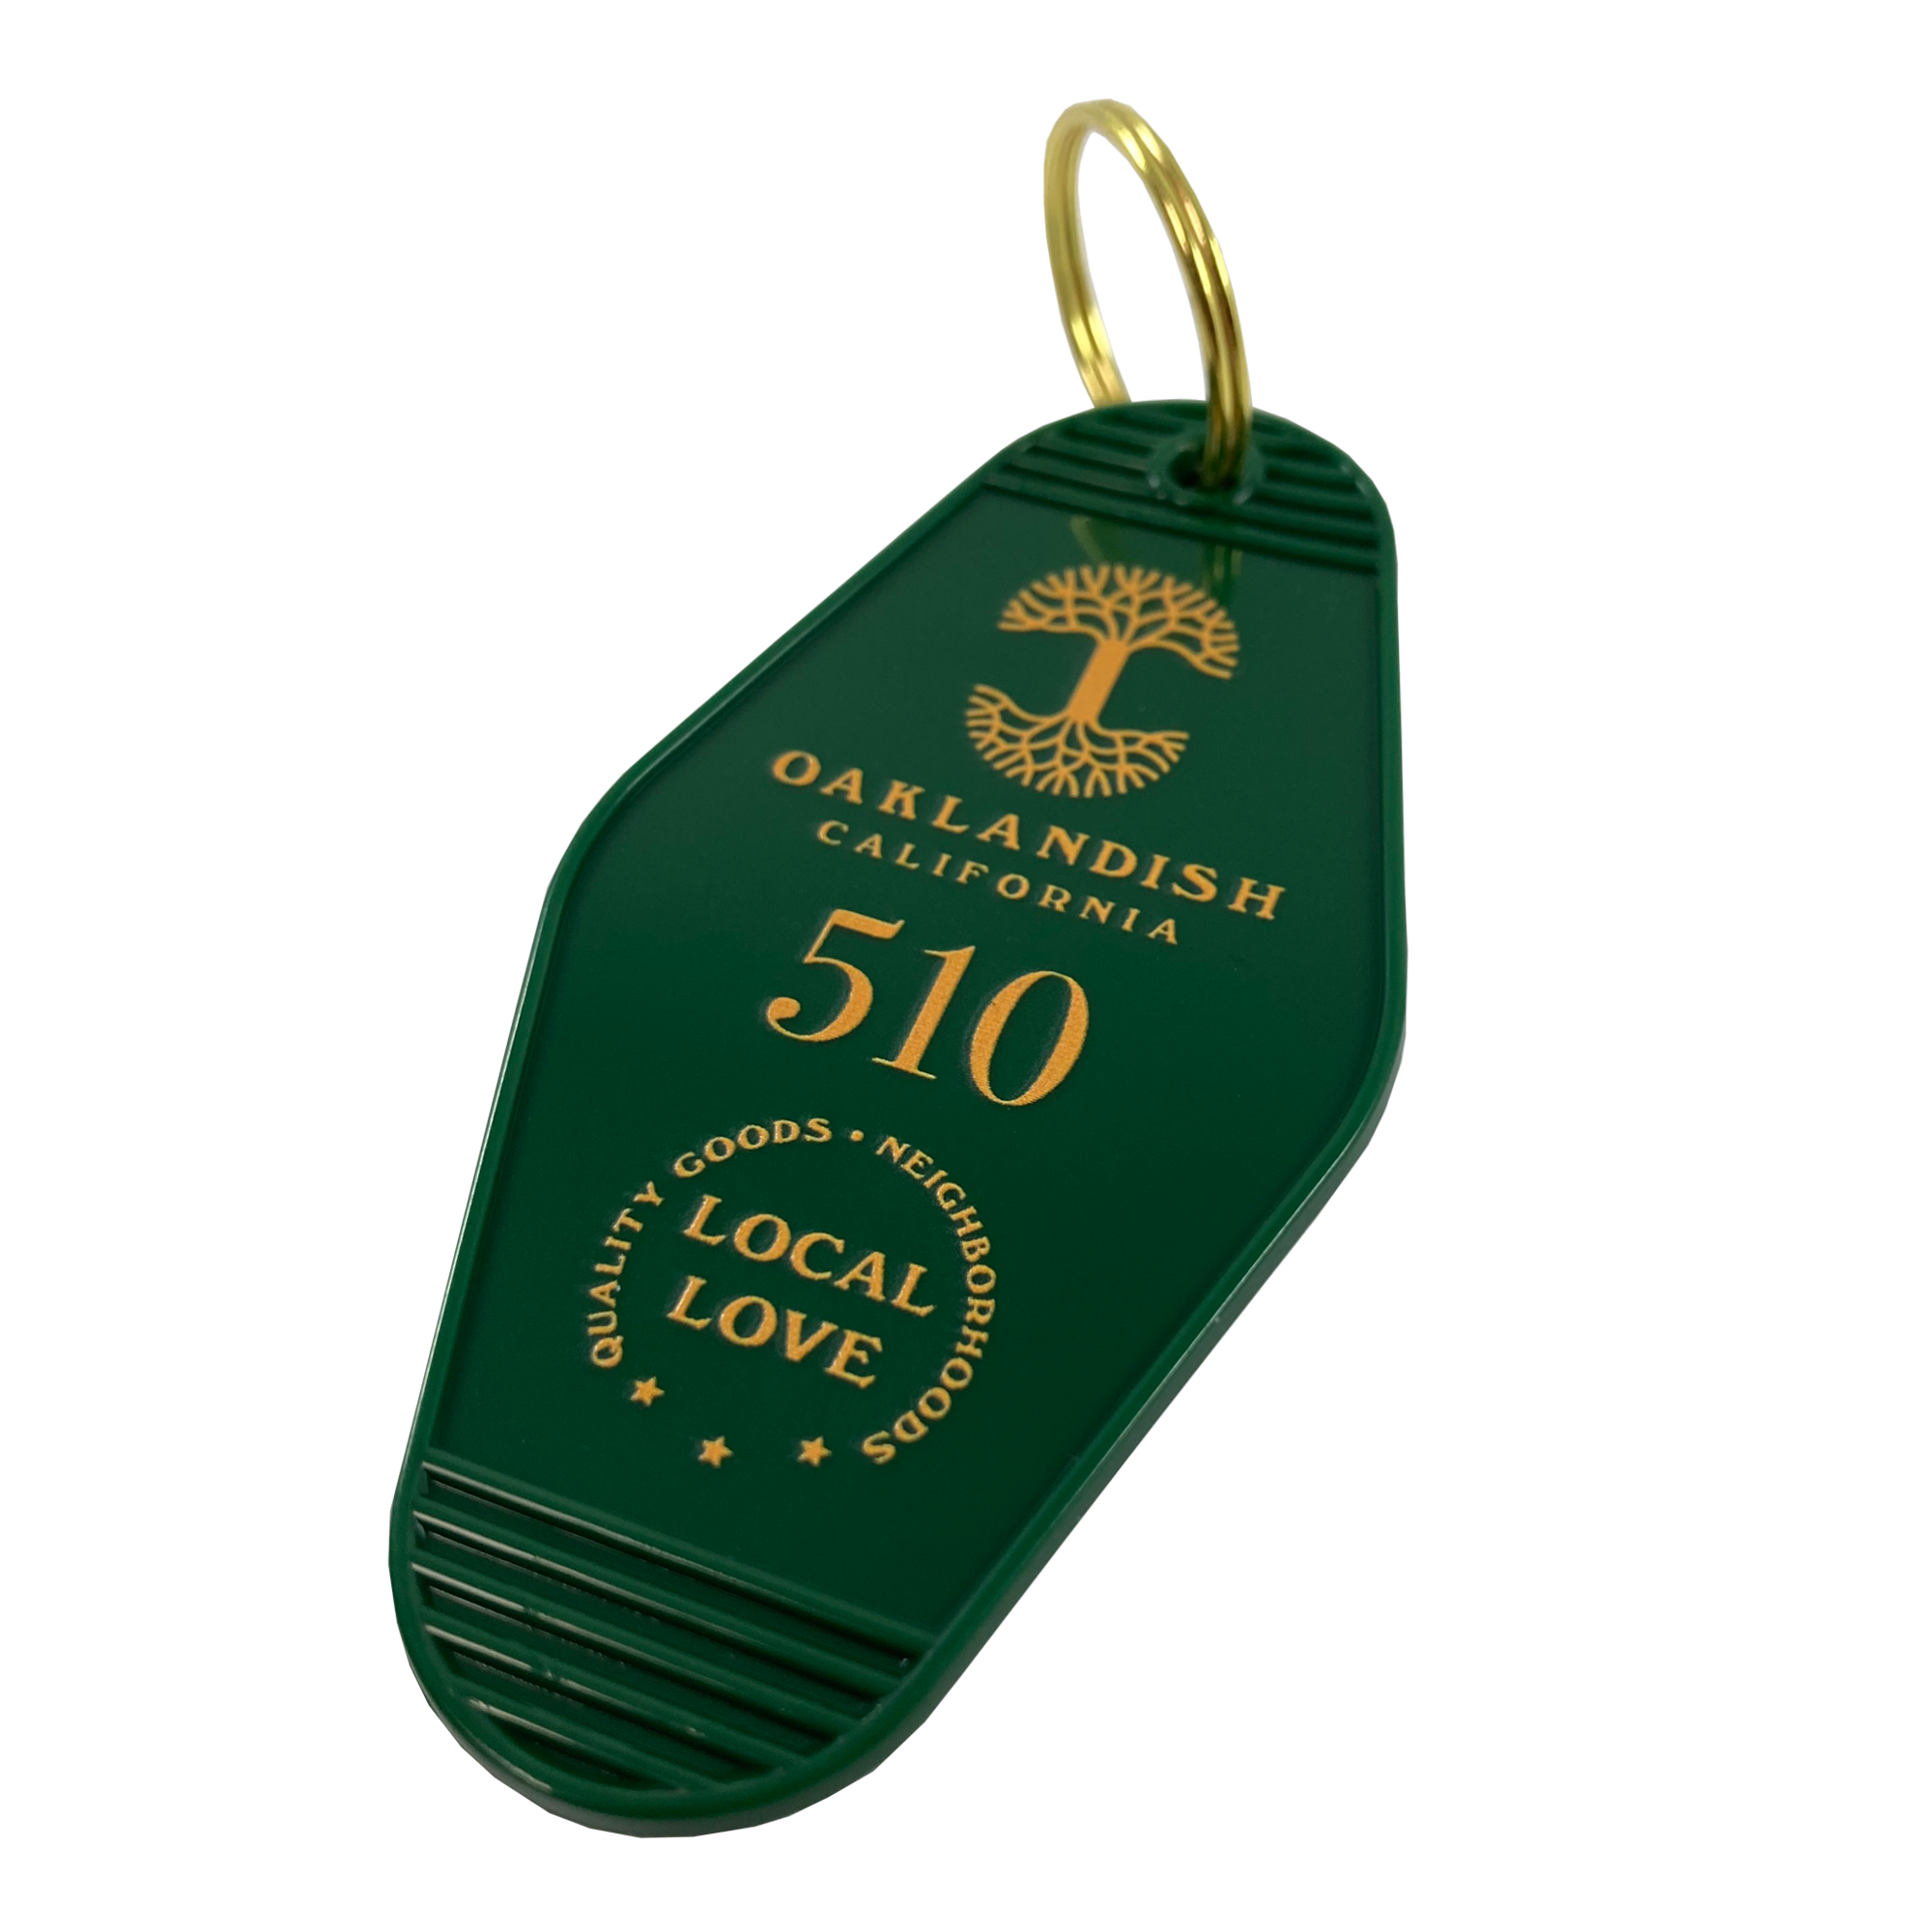 Detailed angle image of green motel-style keychain with gold Oaklandish Logo and wordmark and 510 local love logo.